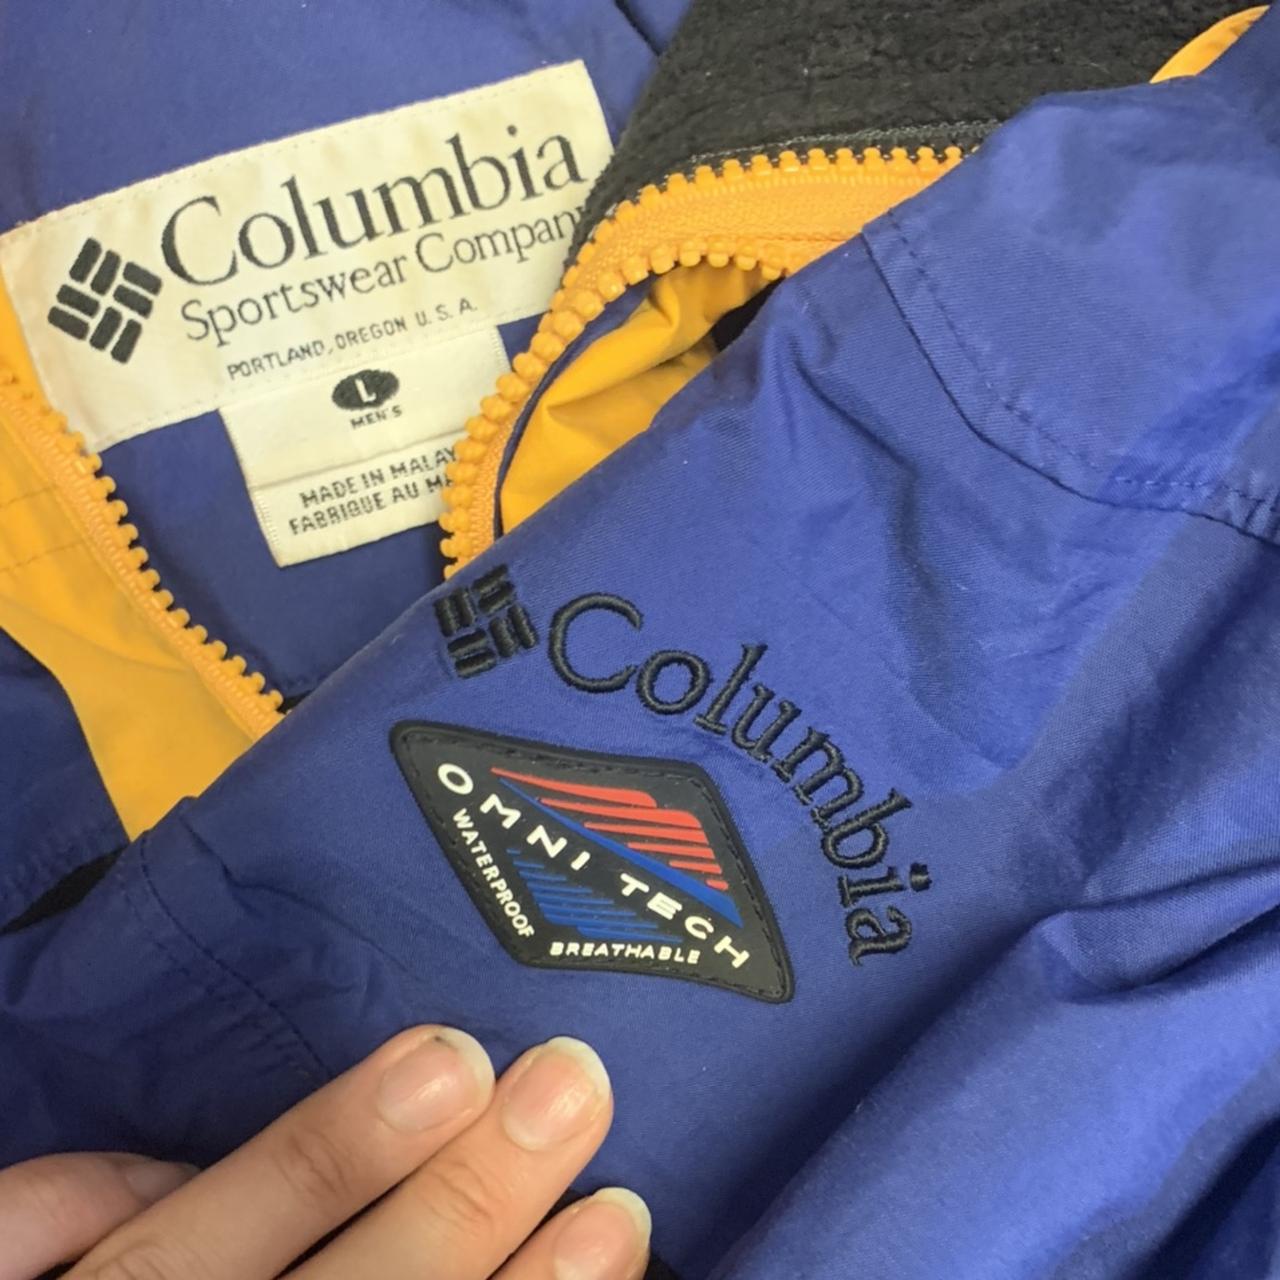 Product Image 3 - Columbia Vintage Omin-Tech jacket
those crazy